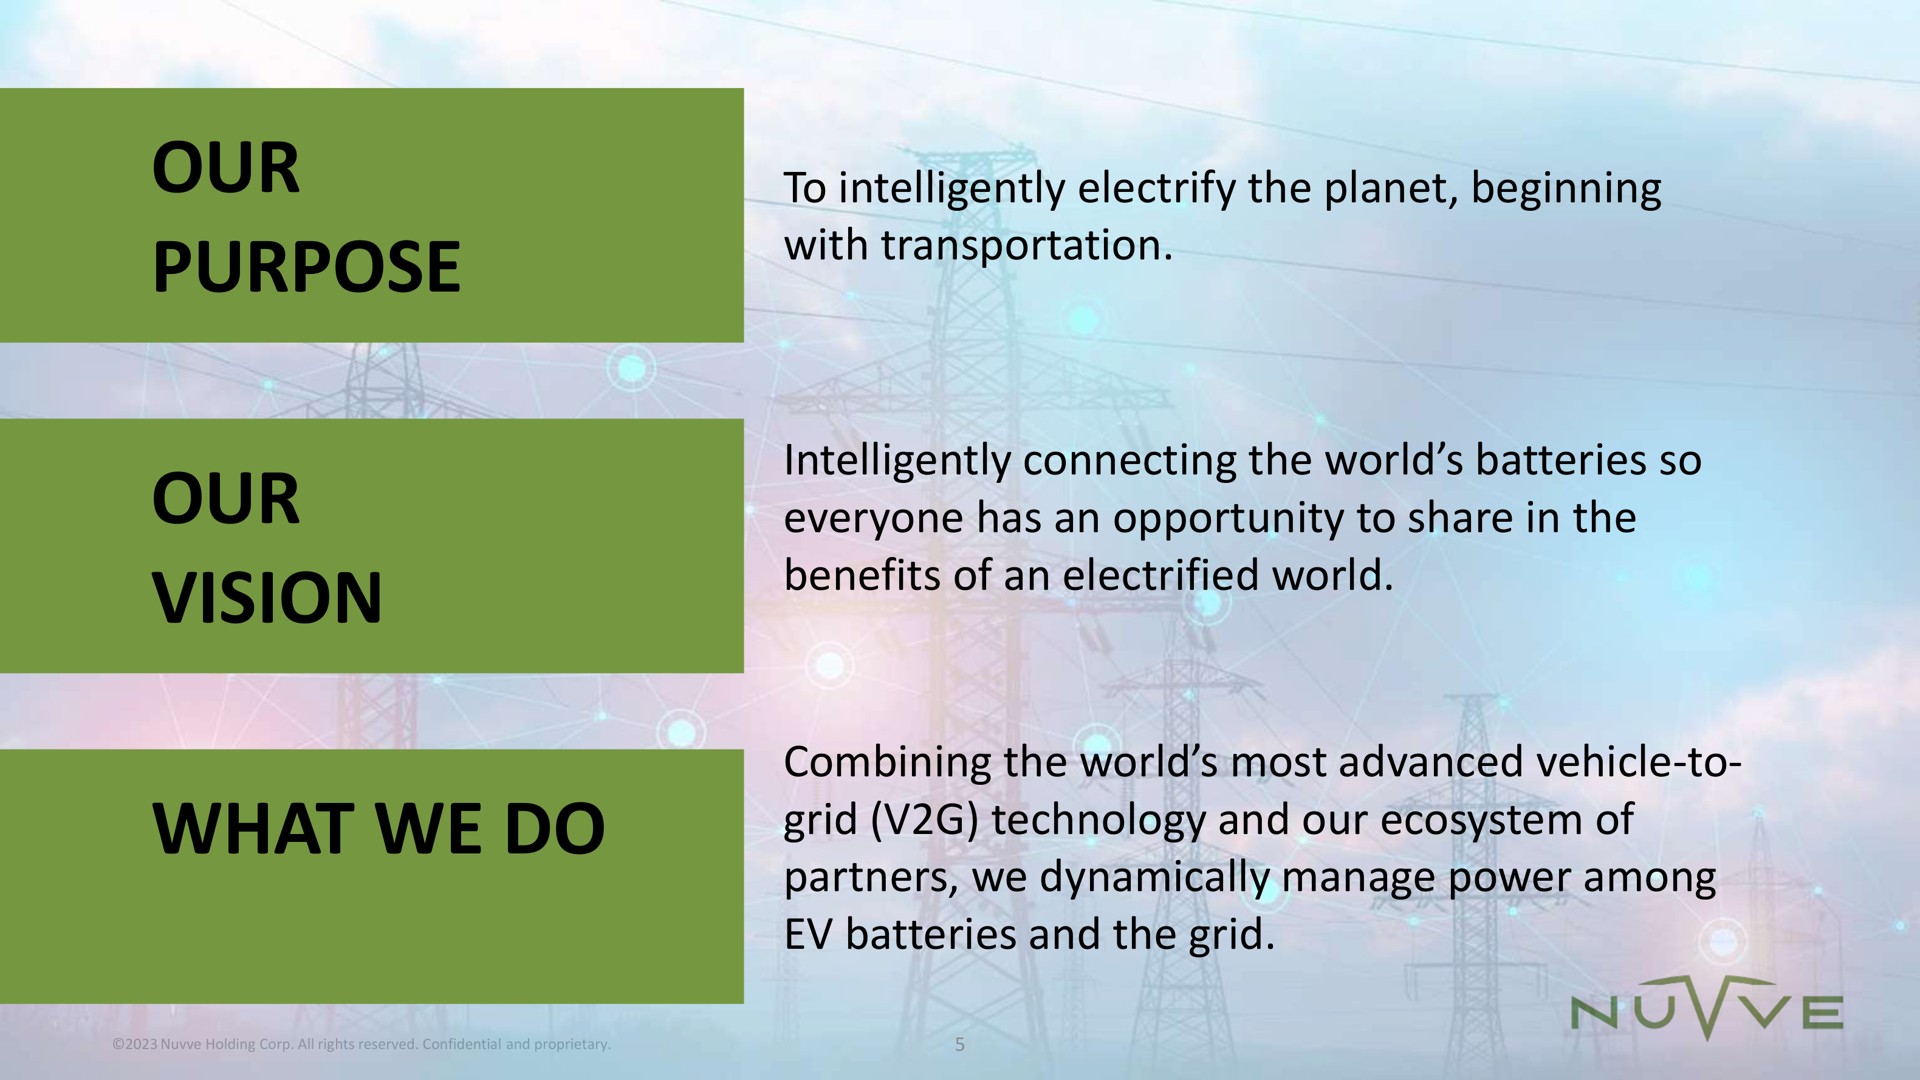 our purpose our vision what we do to intelligently electrify the planet beginning with transportation intelligently connecting the world batteries so everyone has an opportunity to share in the benefits of an electrified world combining the world most advanced vehicle to grid technology and ecosystem of partners dynamically manage power among batteries and the grid | Nuvve